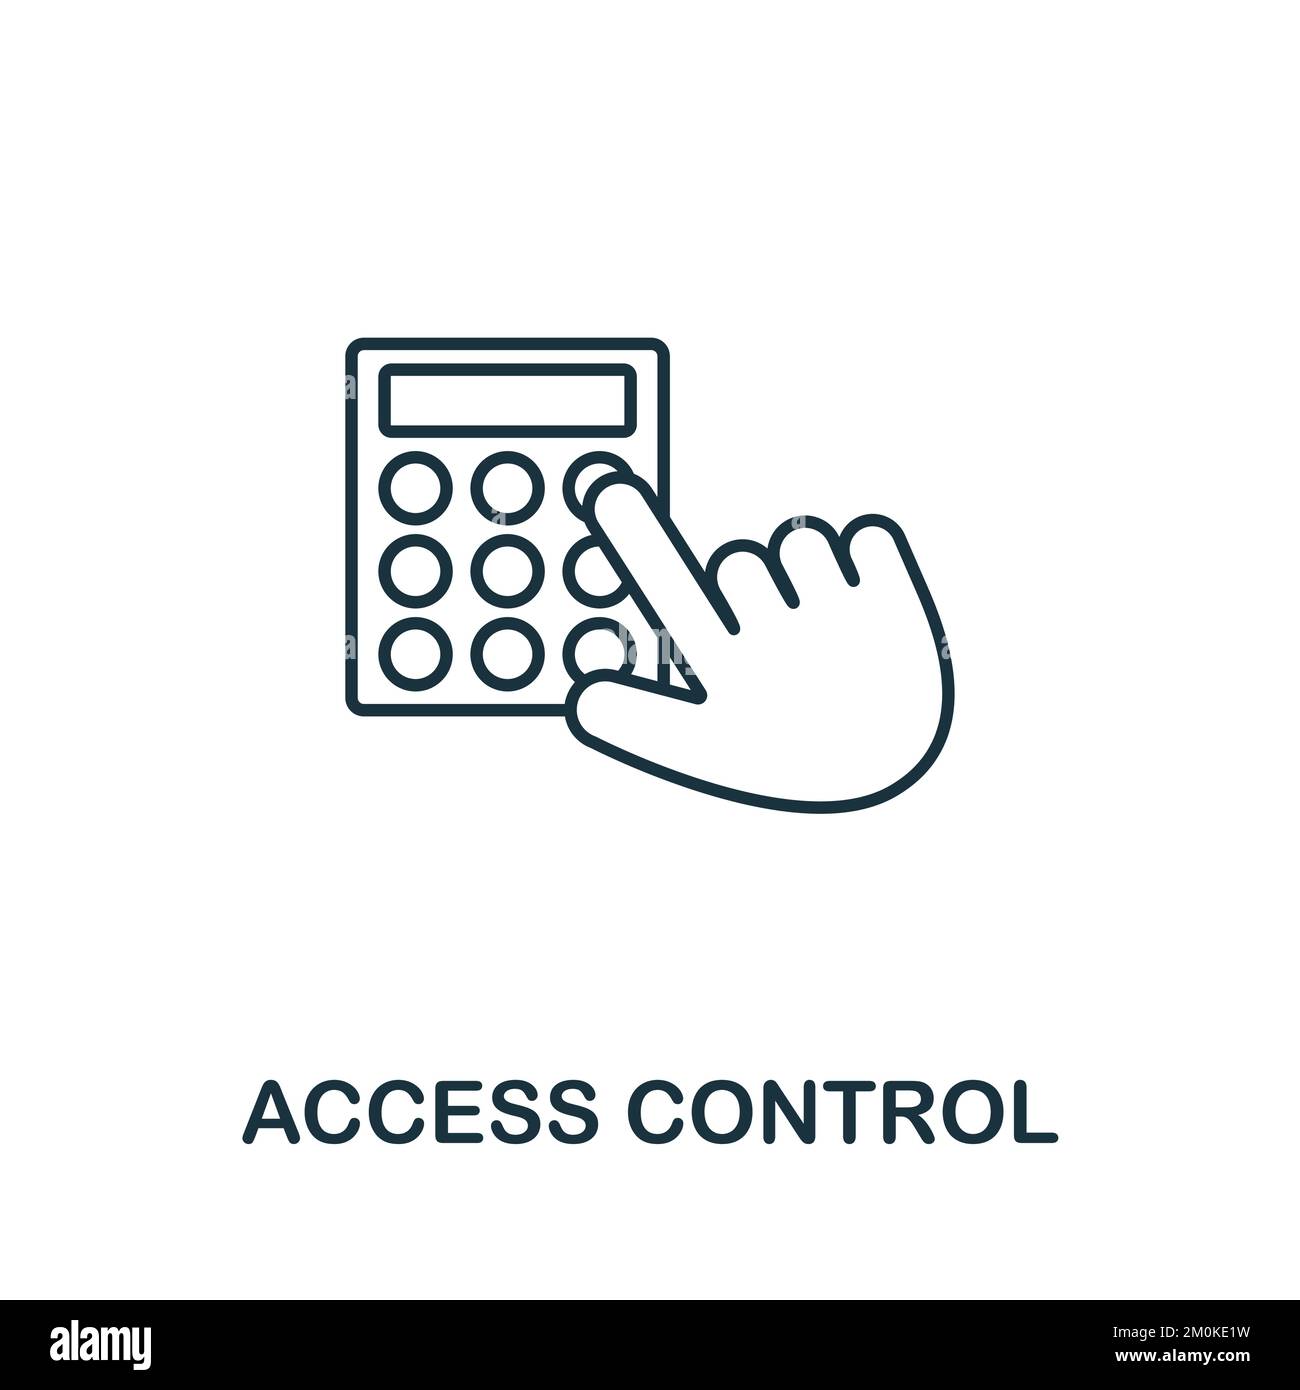 Access Control icon. Monochrome simple Cyber Security icon for templates, web design and infographics Stock Vector